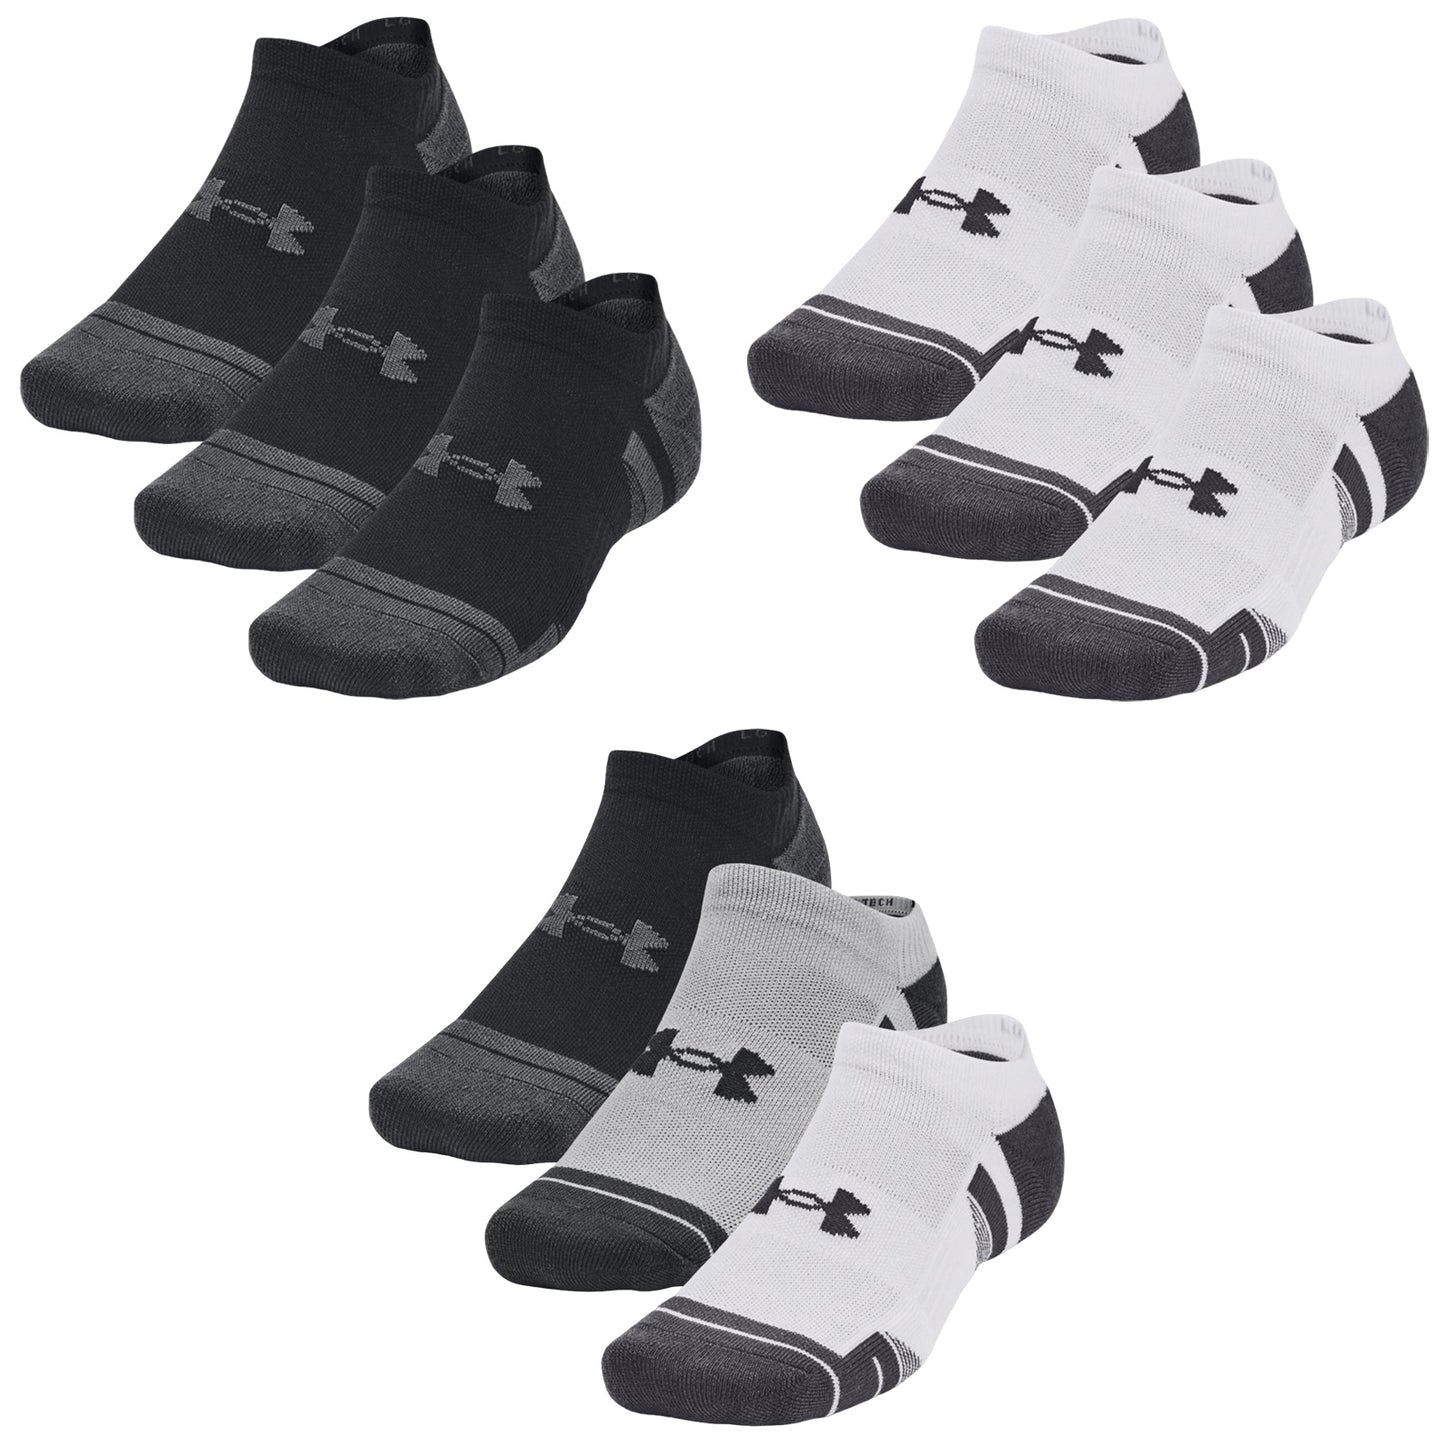 Under Armour Performance Tech No-Show Socks (3 Pairs)